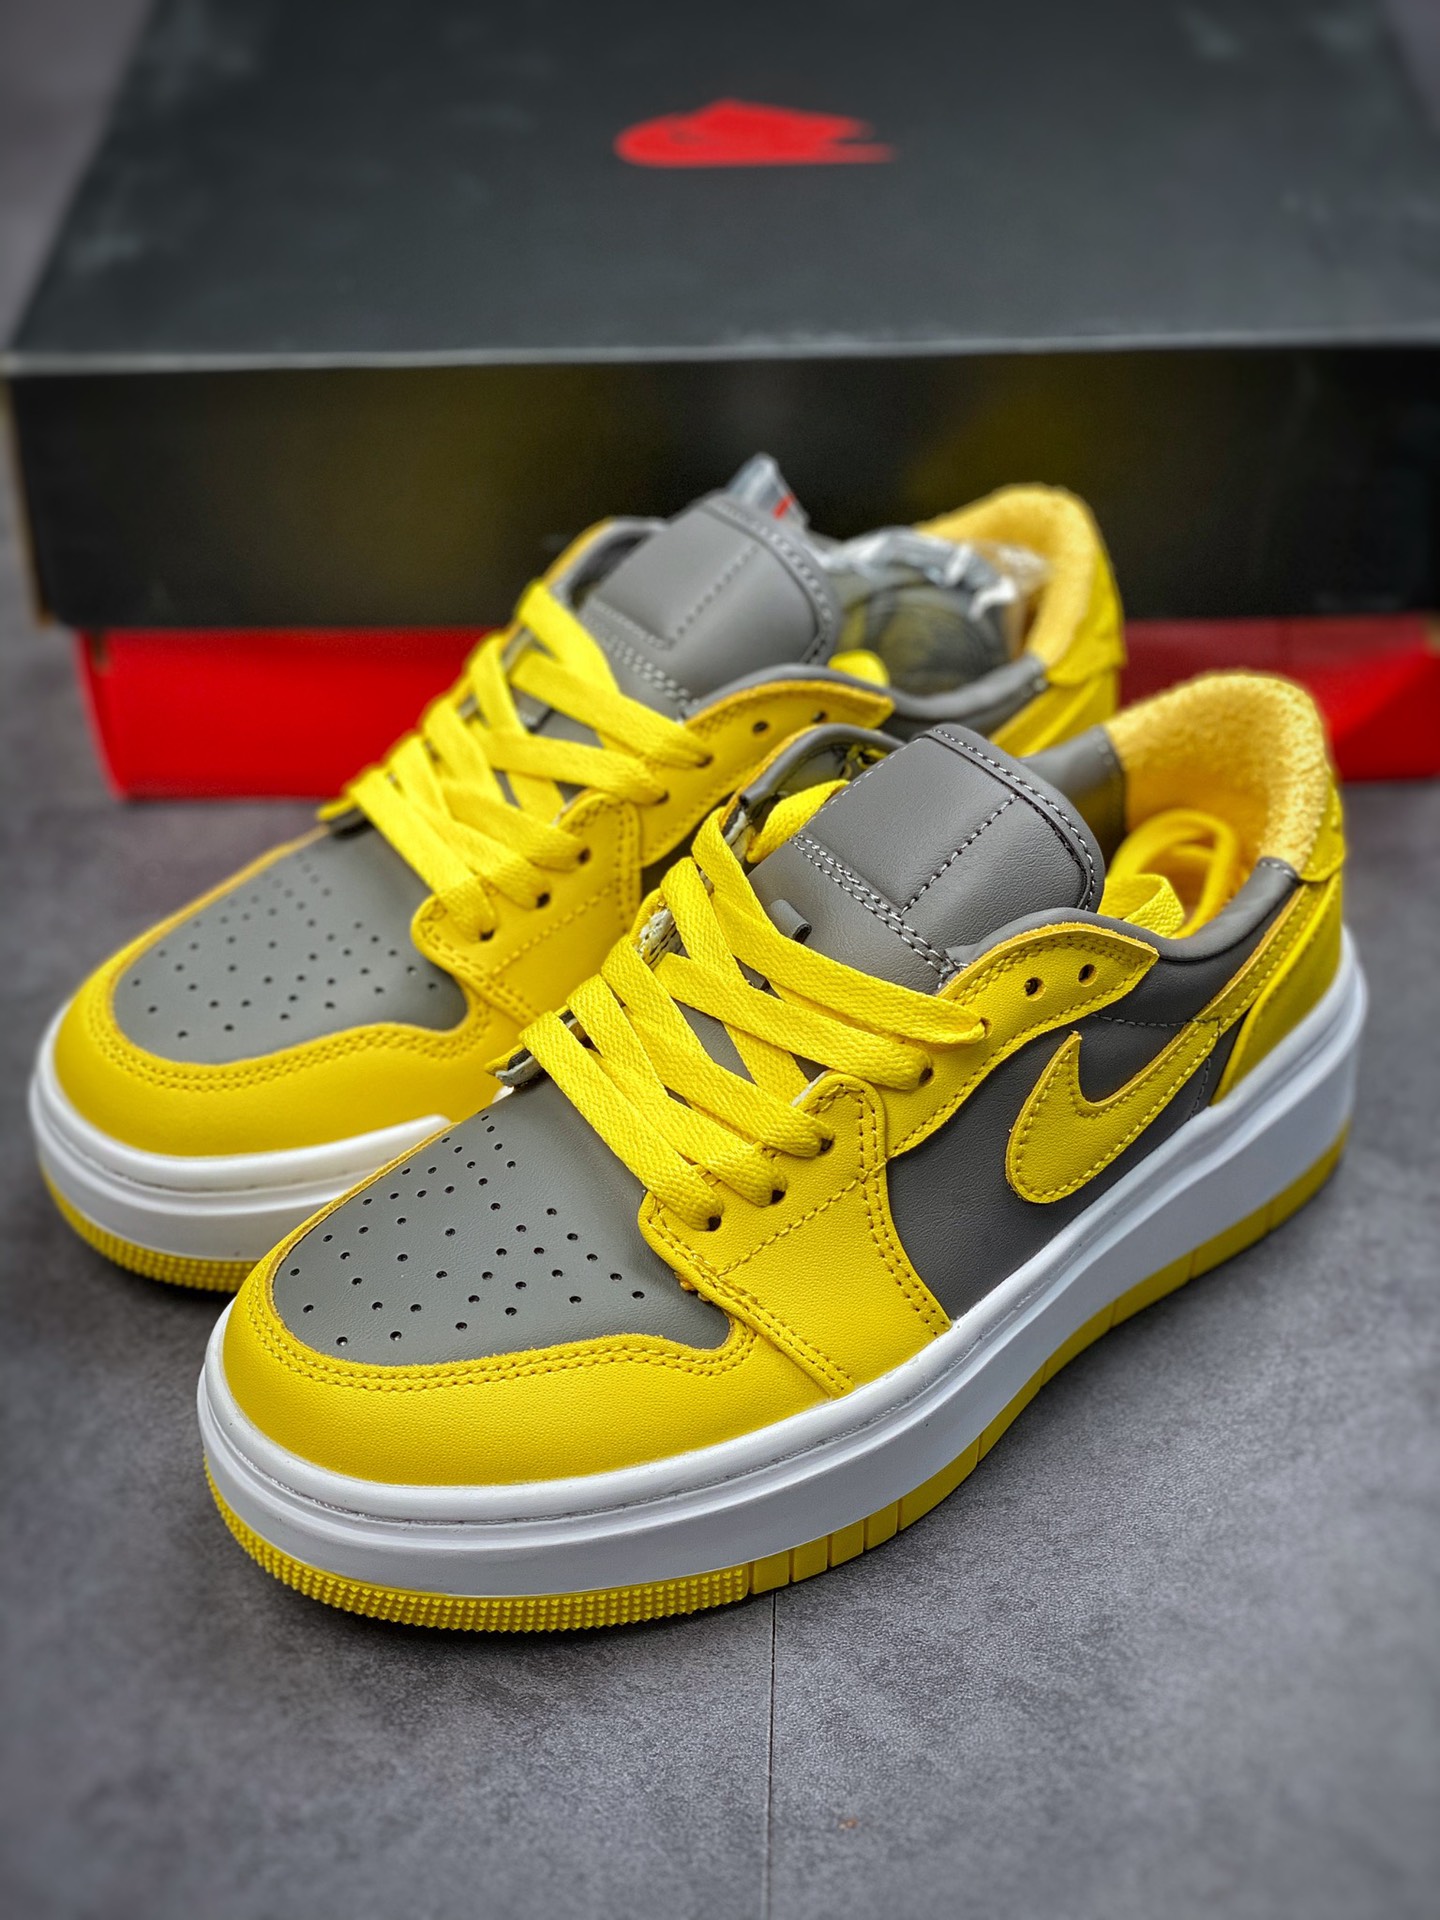 # Air Jordan 1 Elevate Low SE thick sole retro basketball shoes DH7004-017